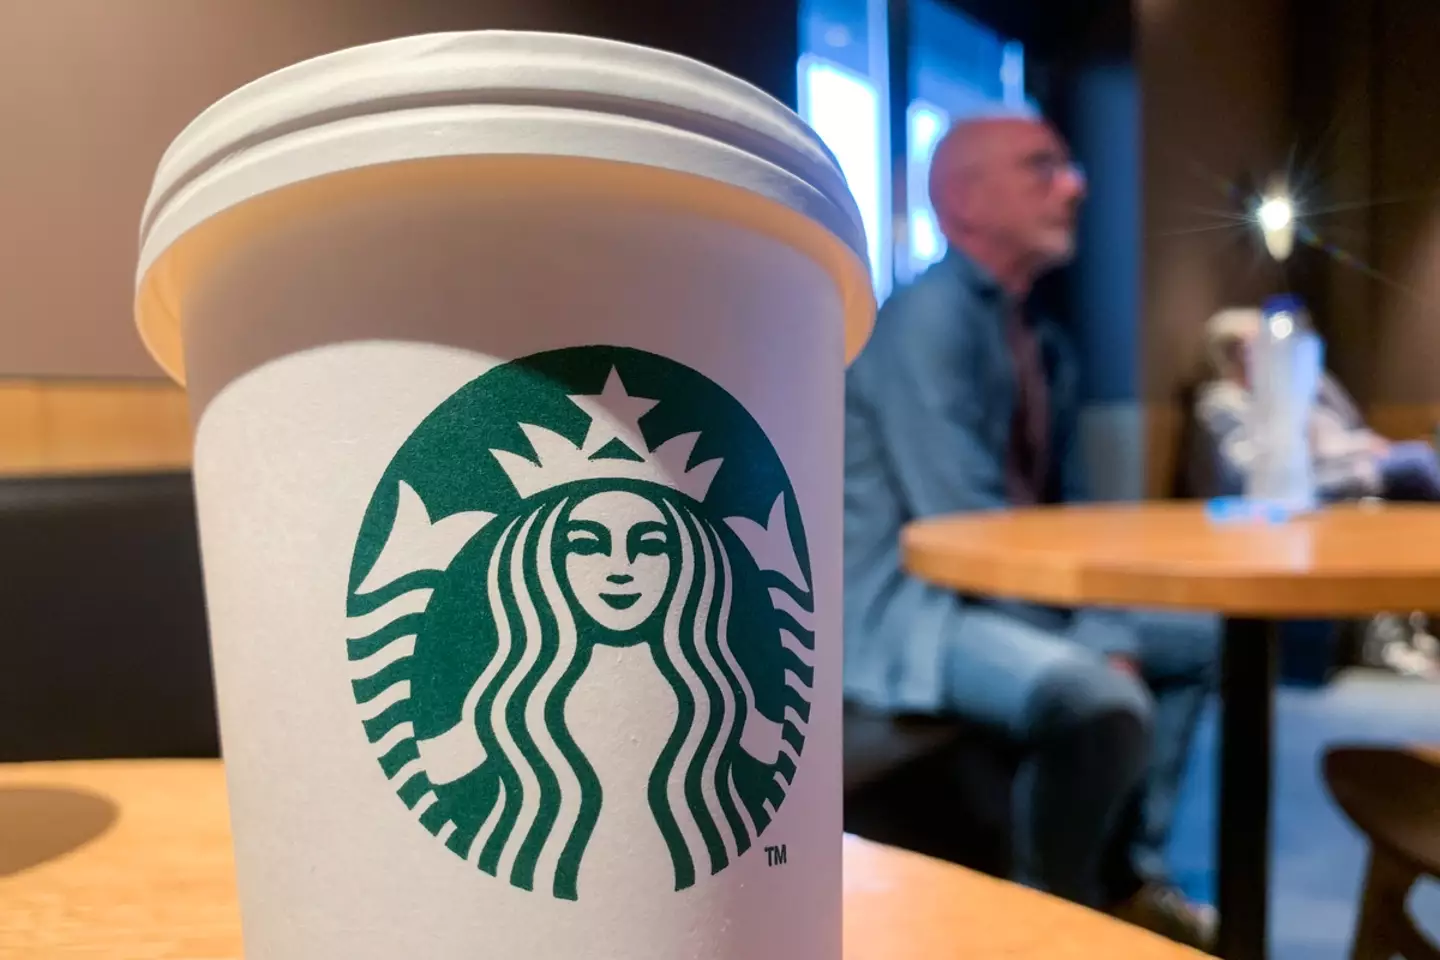 A Starbucks barista has been praised for their quick thinking.